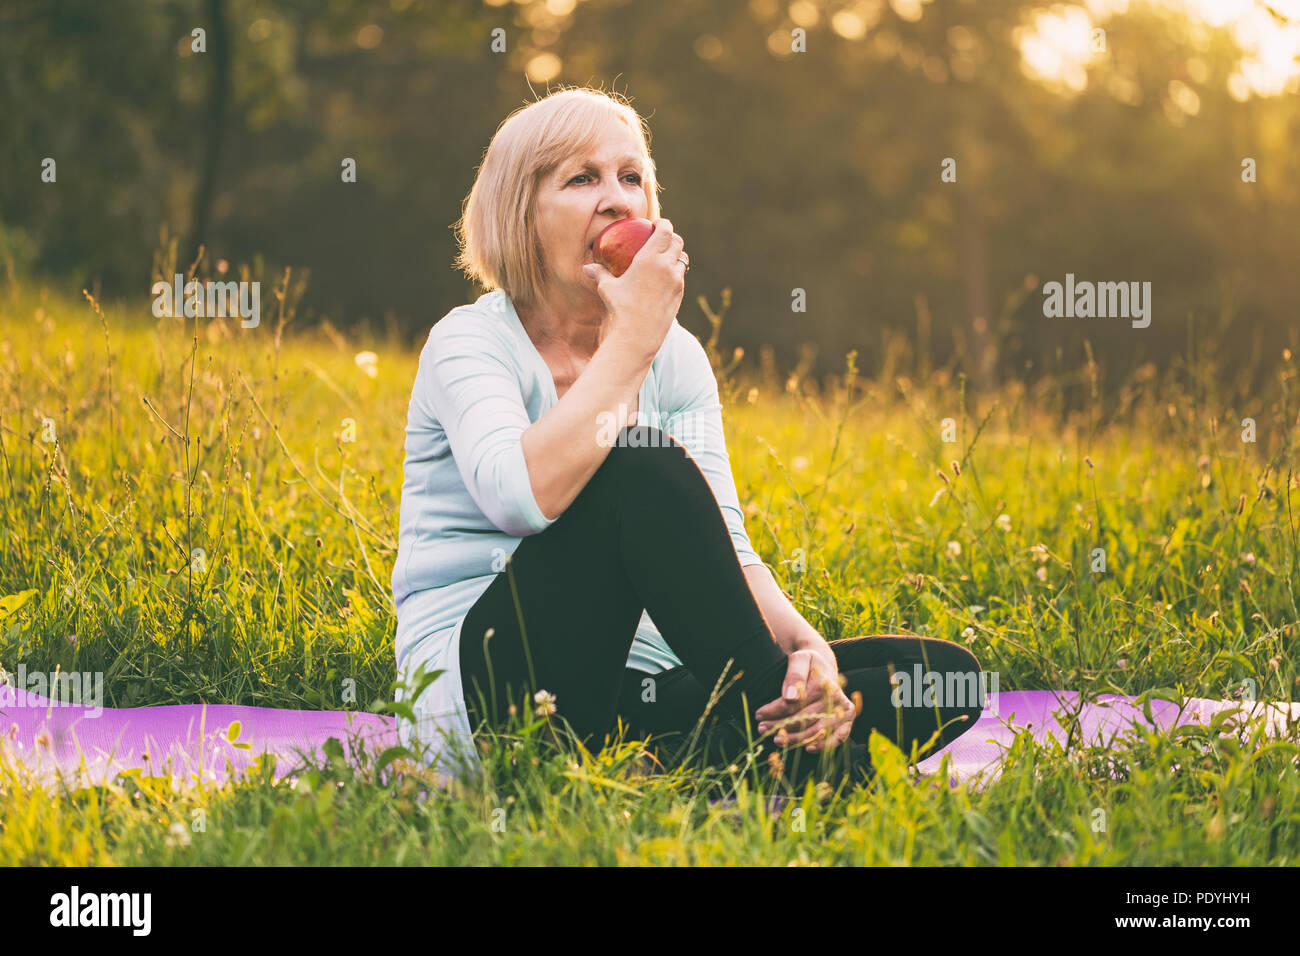 Active senior woman eating apple after exercise.Image is intentionally toned. Stock Photo